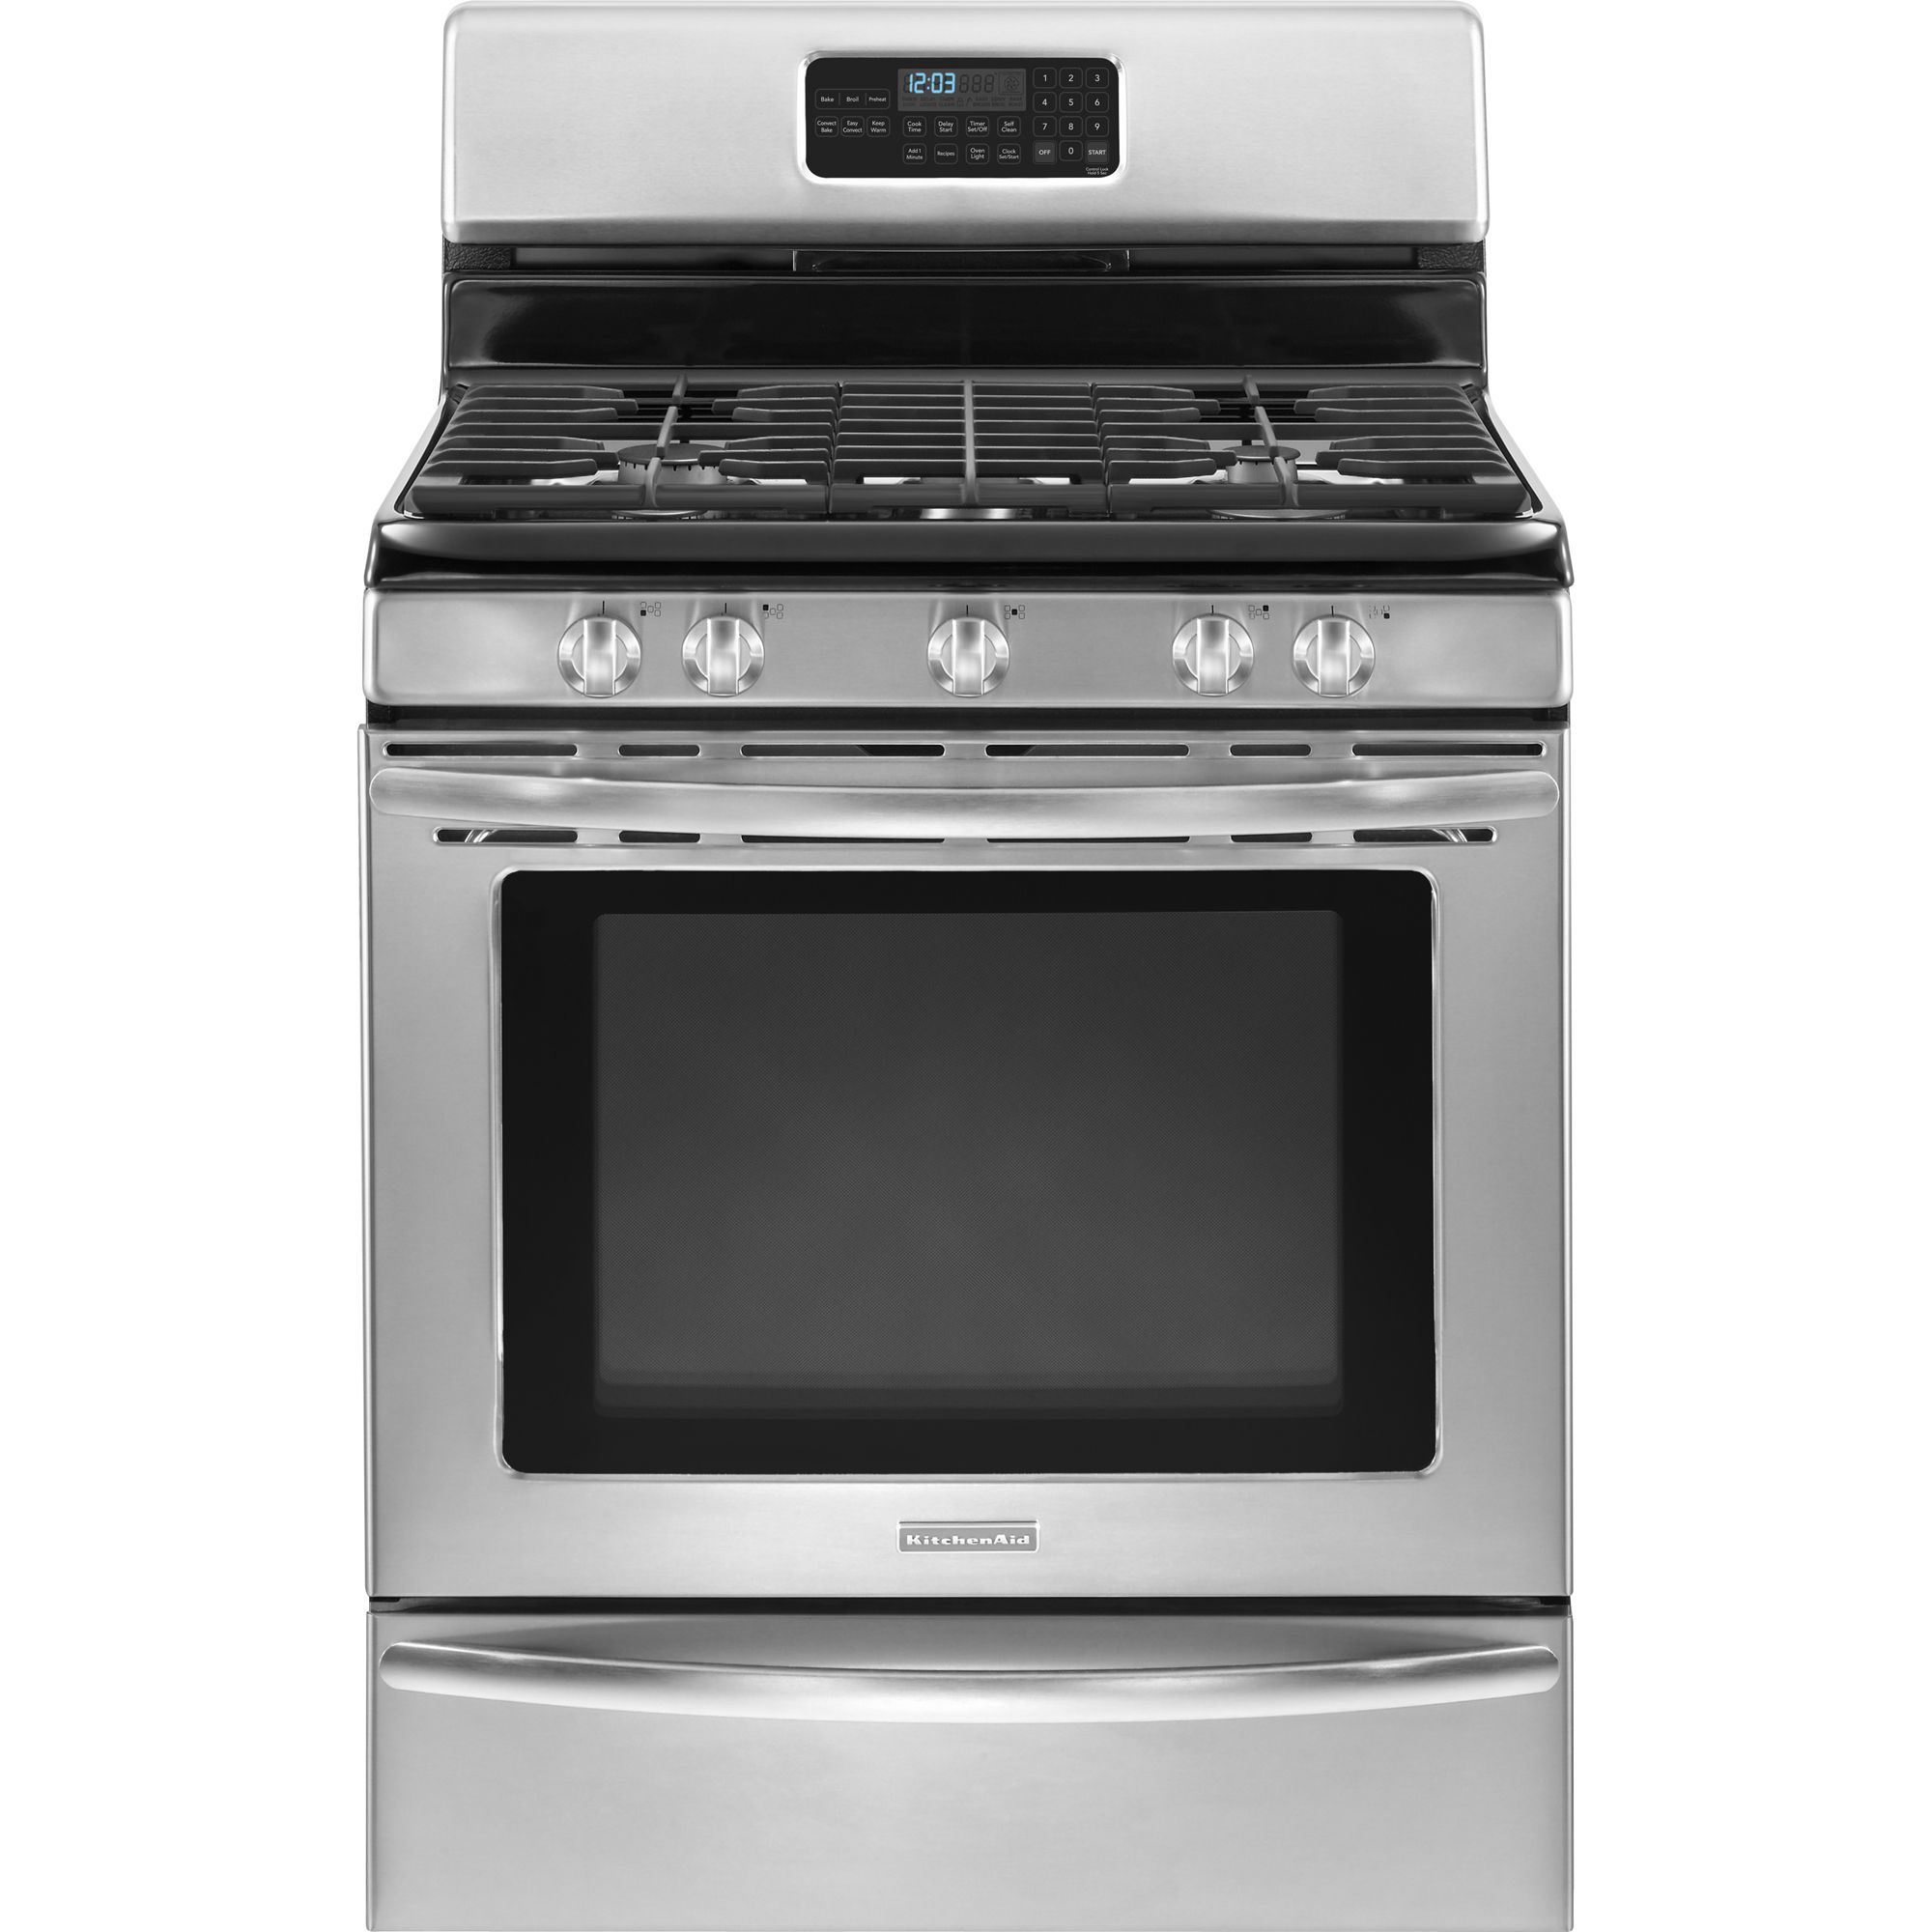 KitchenAid Architect II KGRS206XSS Gas Range - Freestanding - 30 Wide - 1 Oven(s) - 5 Cooking Elements - Stainless Steel